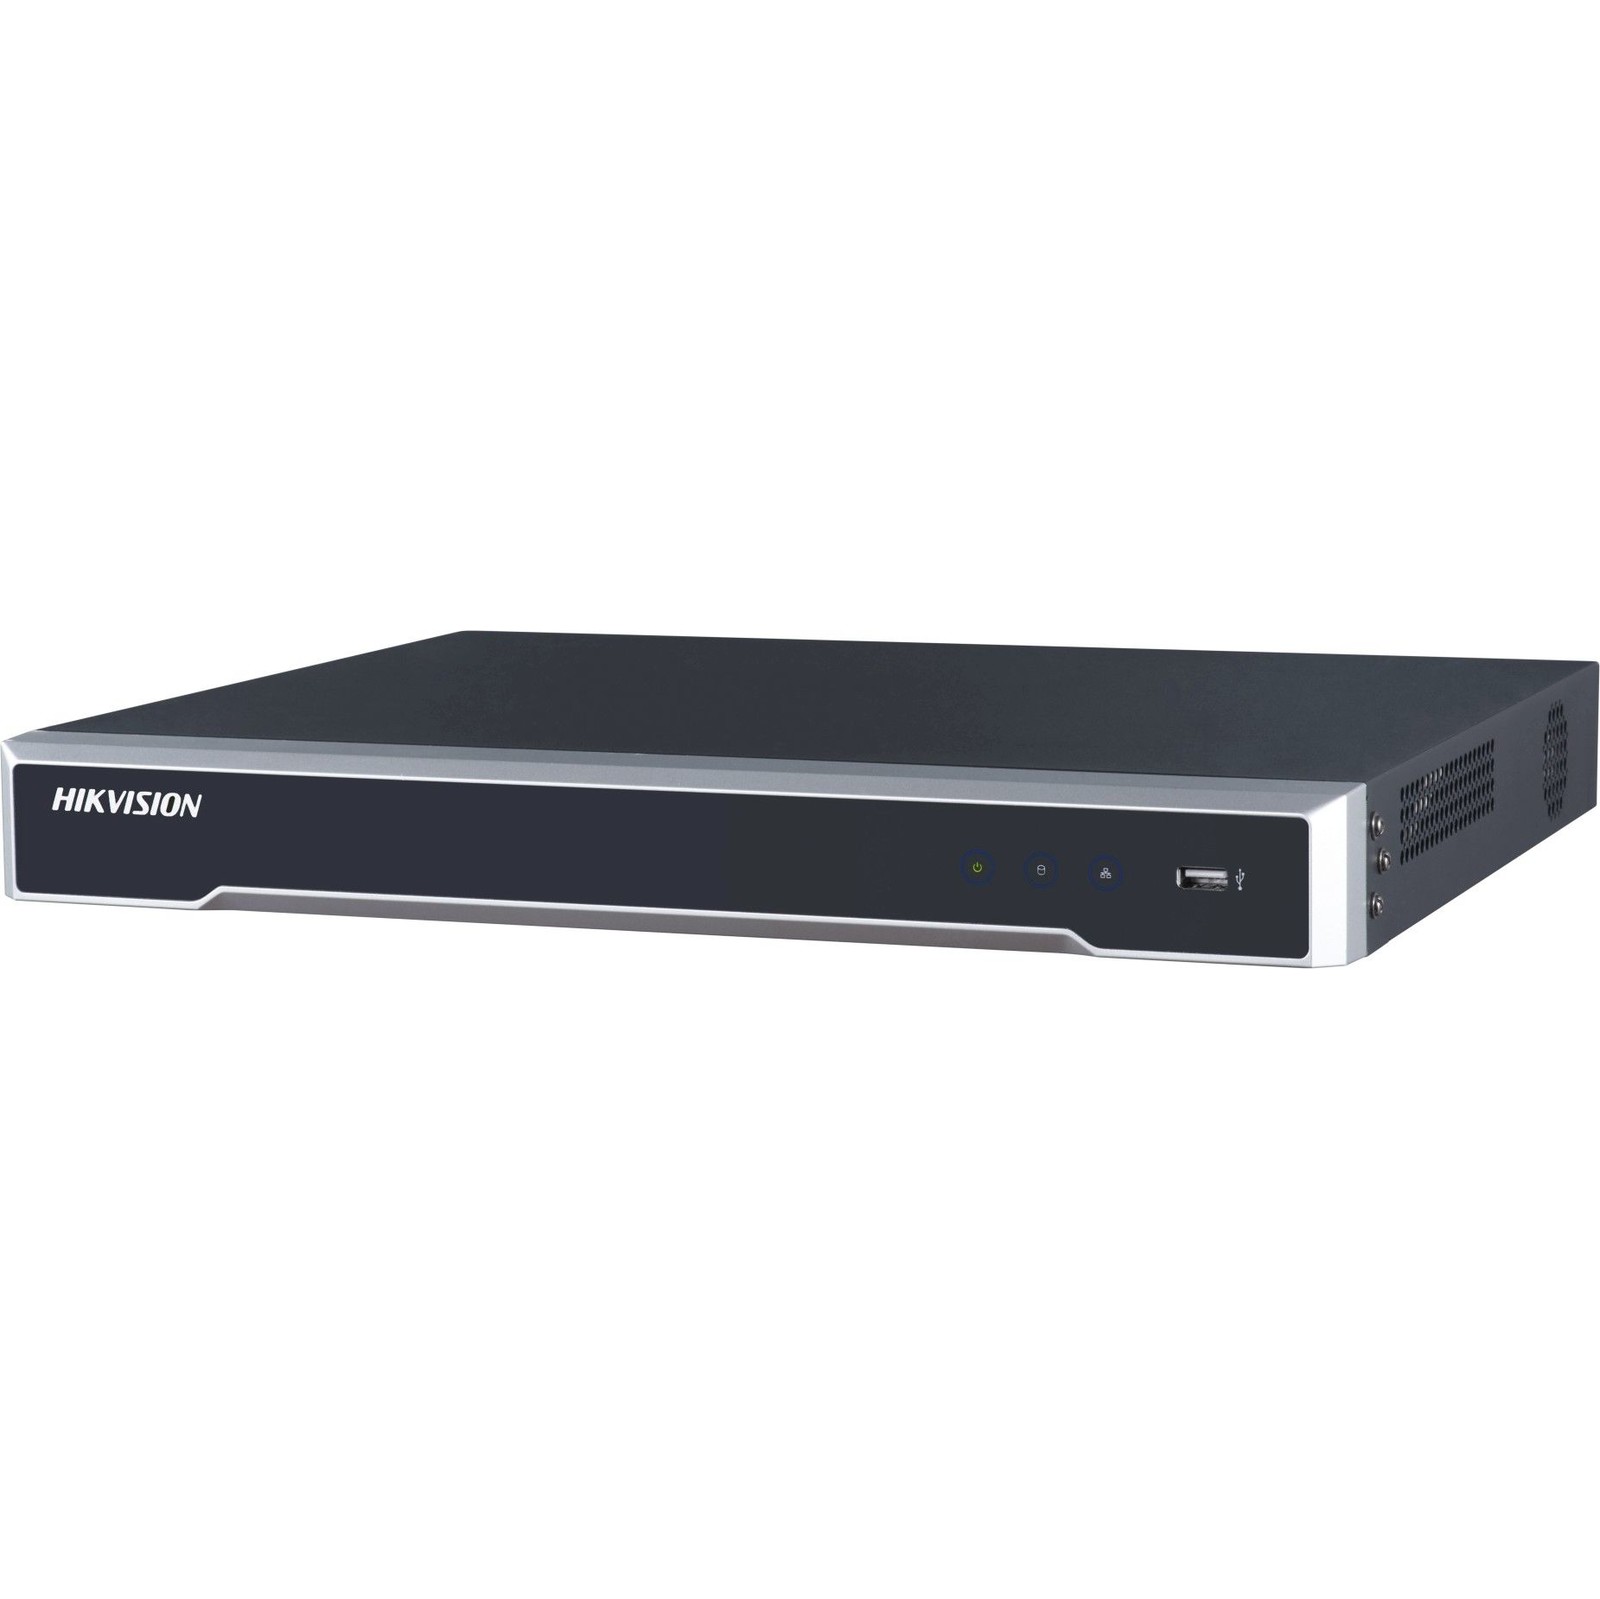 You Recently Viewed Hikvision DS-7616NI-K2/16P 16-channel 4K NVR Image